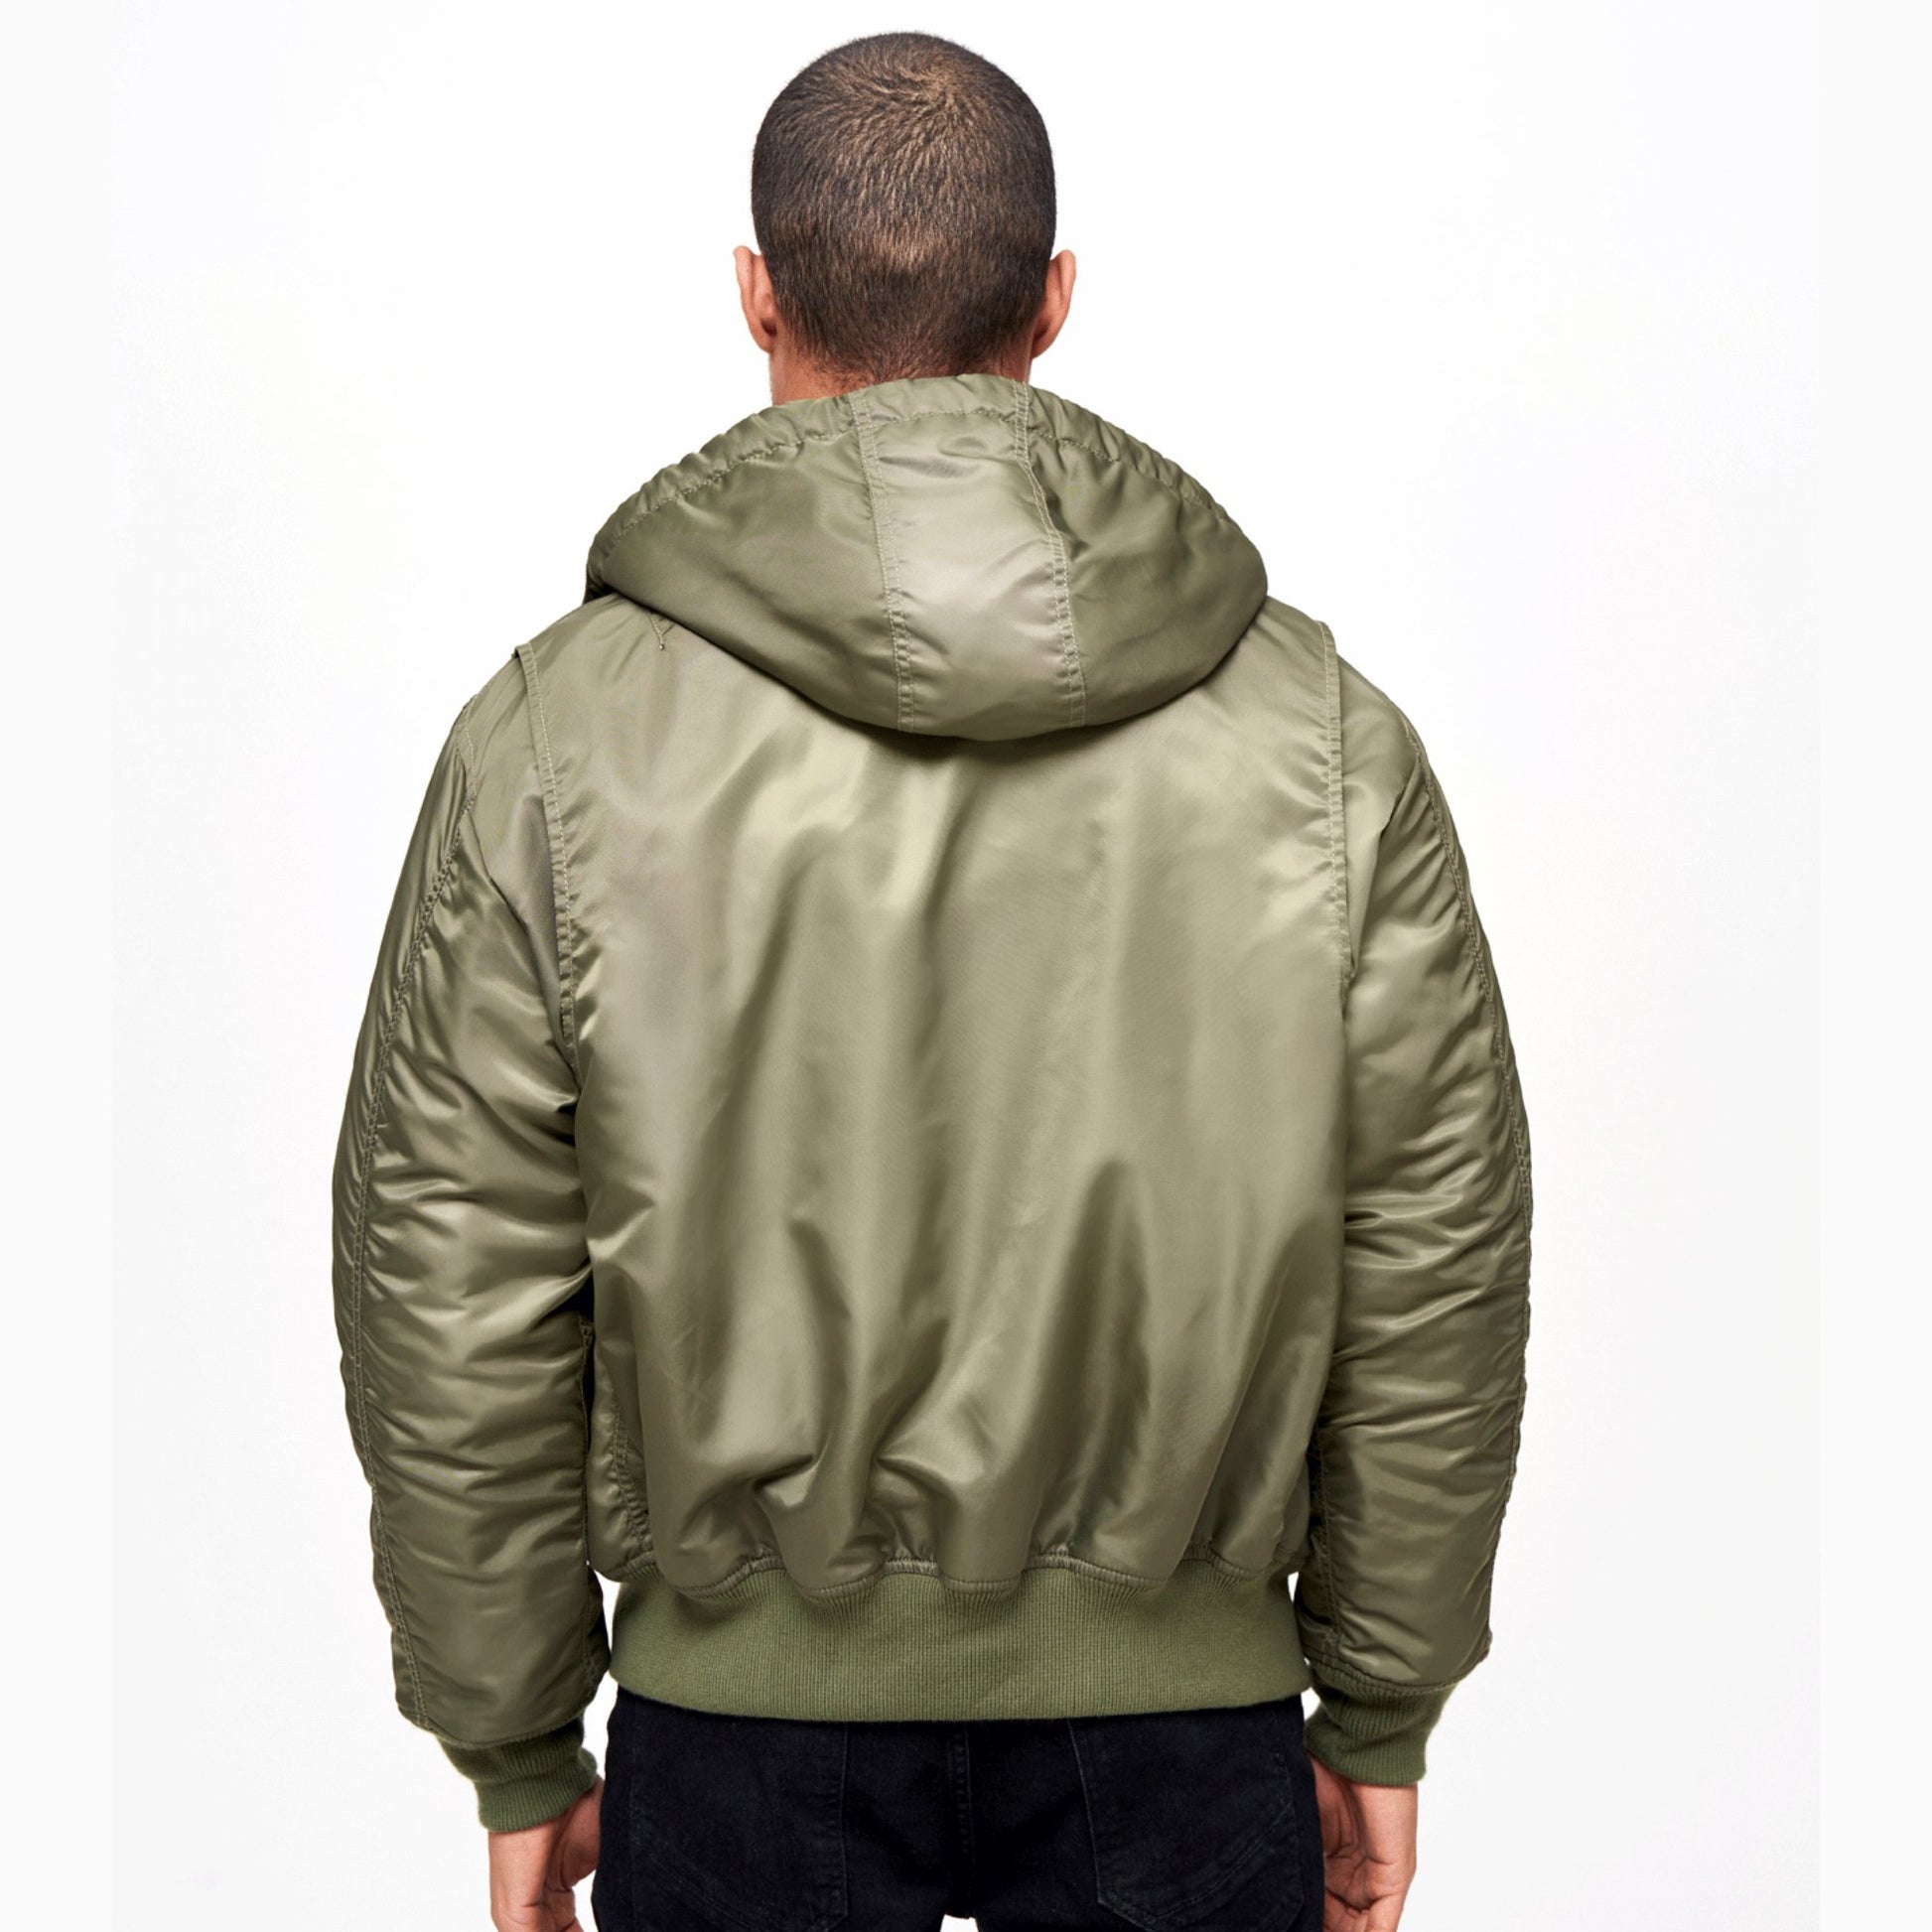 Warm & Cozy Men's Olive Hooded Jacket - BeExtra! Apparel & More